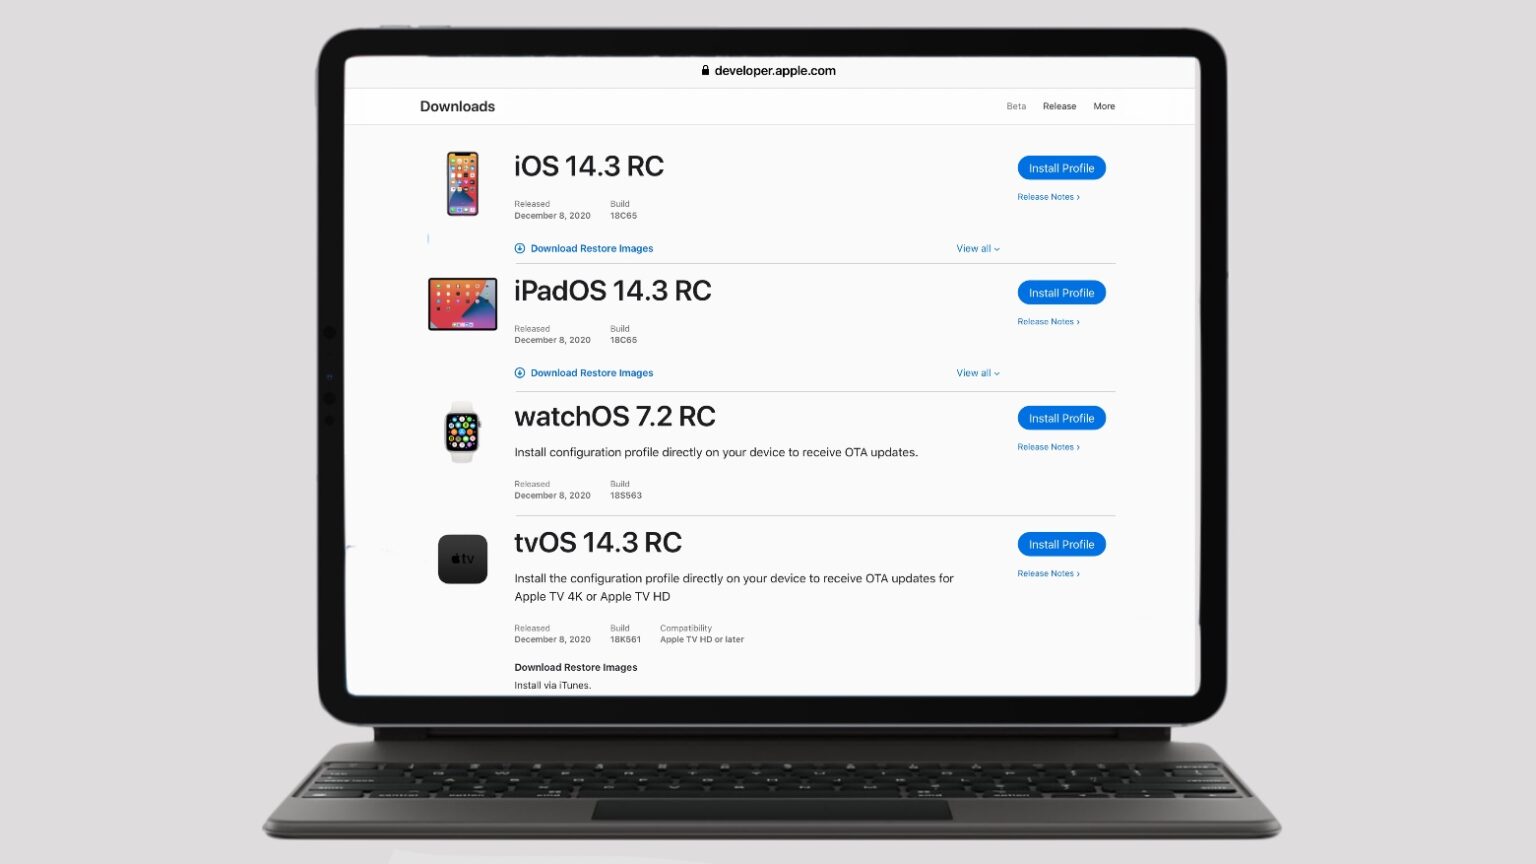 iOS 14.3 Release Candidate, iPadOS 14.3Release Candidate, watchOS 7.2 Release Candidate and tvOS 14.3 Release Candidate.